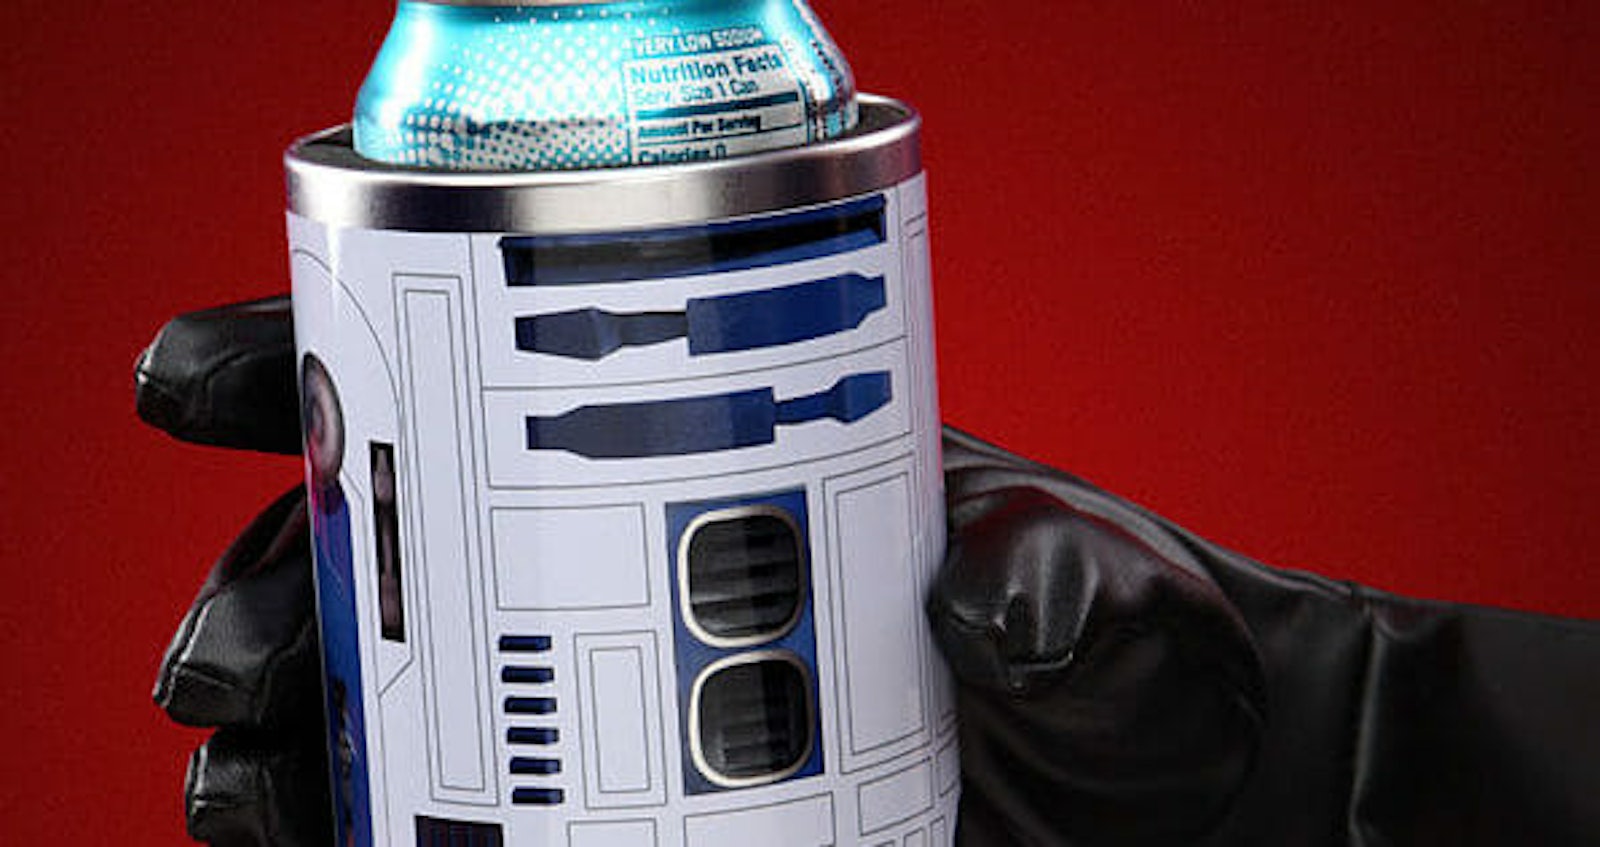 R2-D2 can coolers